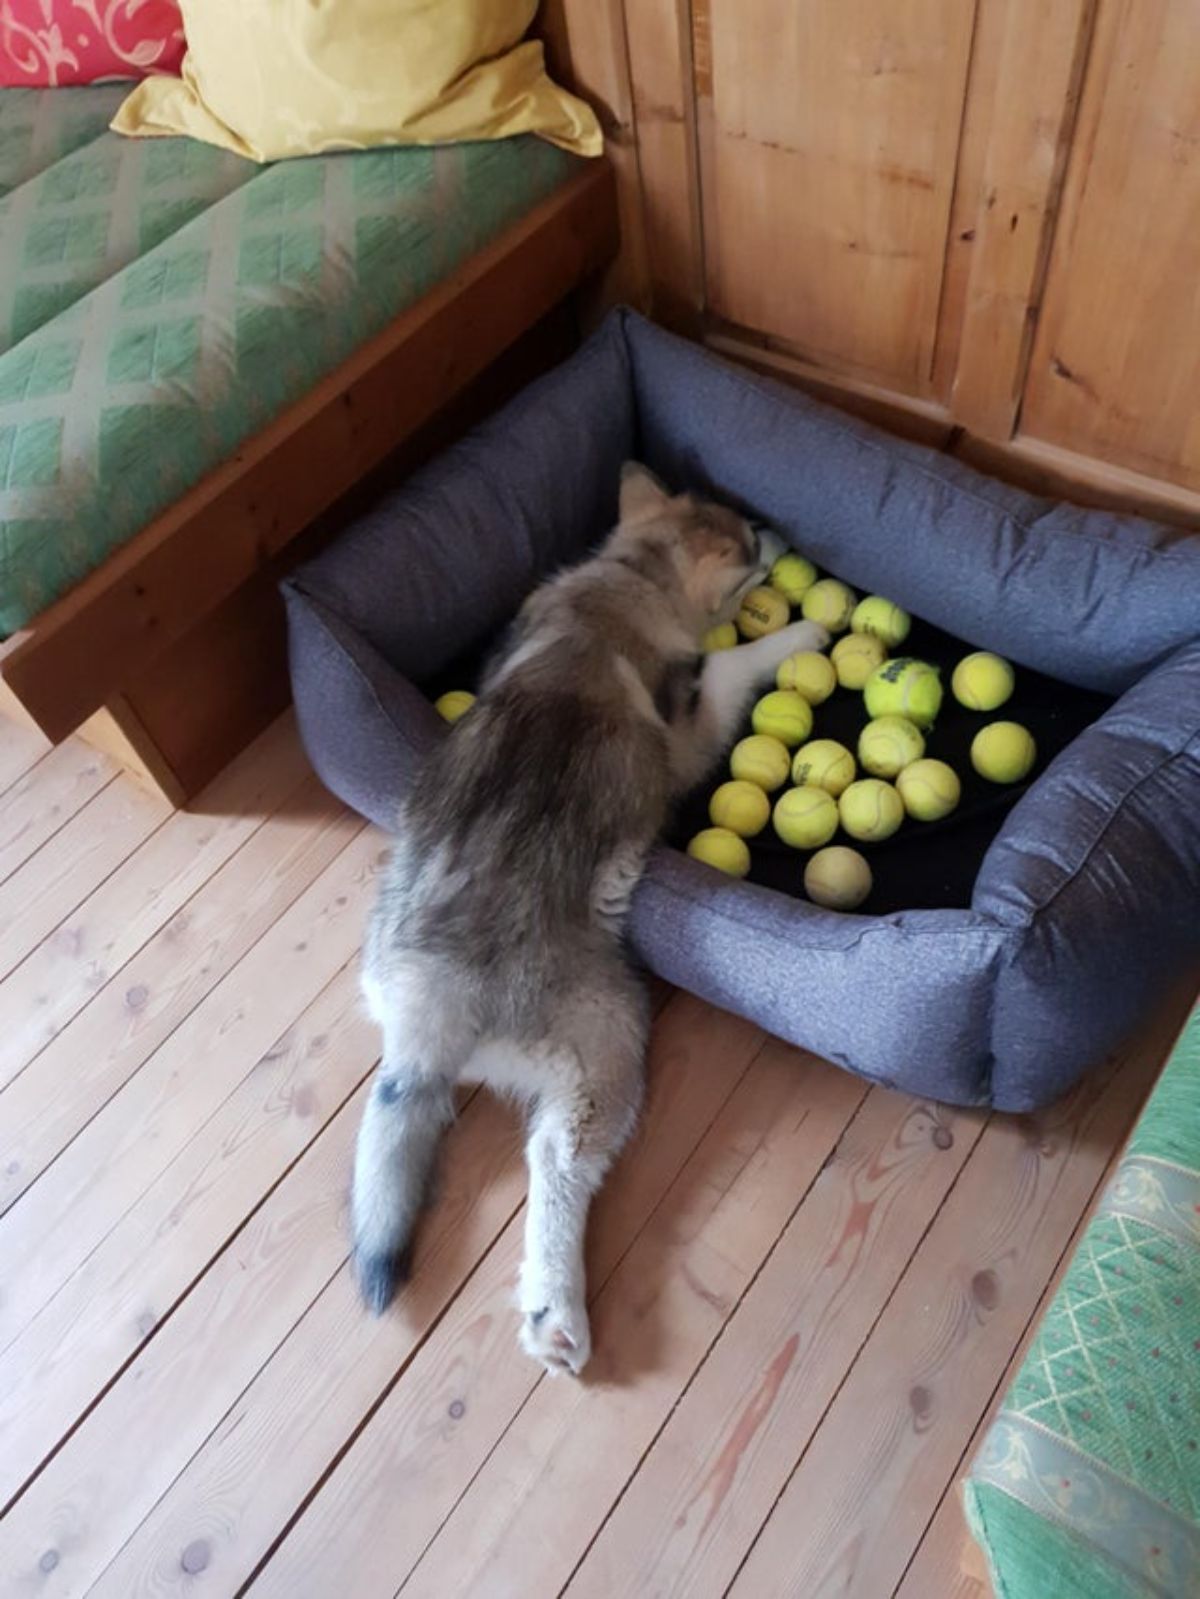 black and white husky sleeping partly on a blue dog bed that's full of yellow tennis balls